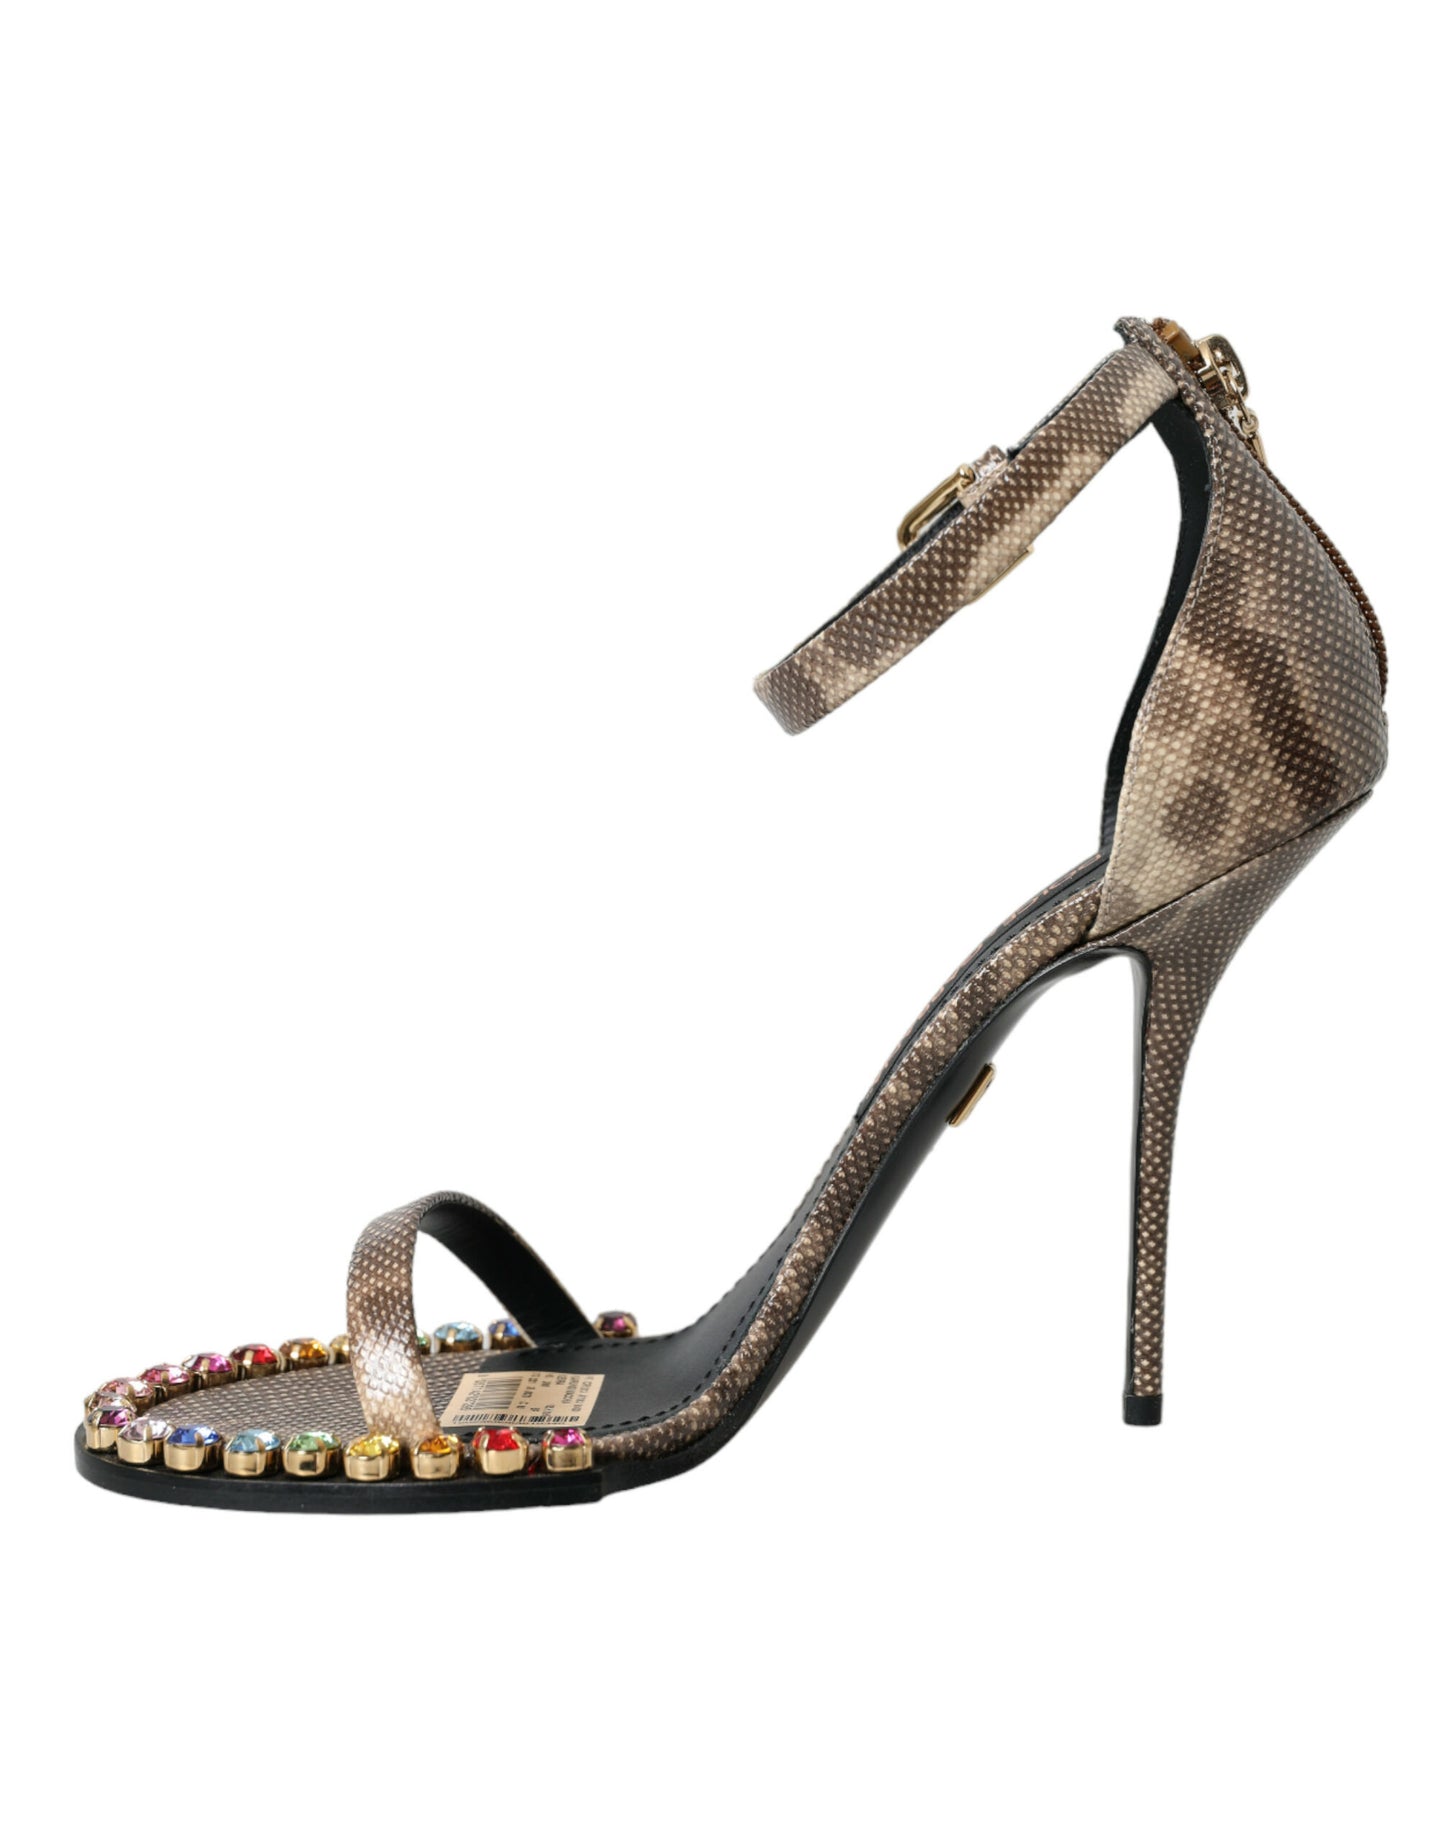 Dolce & Gabbana Brown Exotic Leather Crystal Sandals Shoes